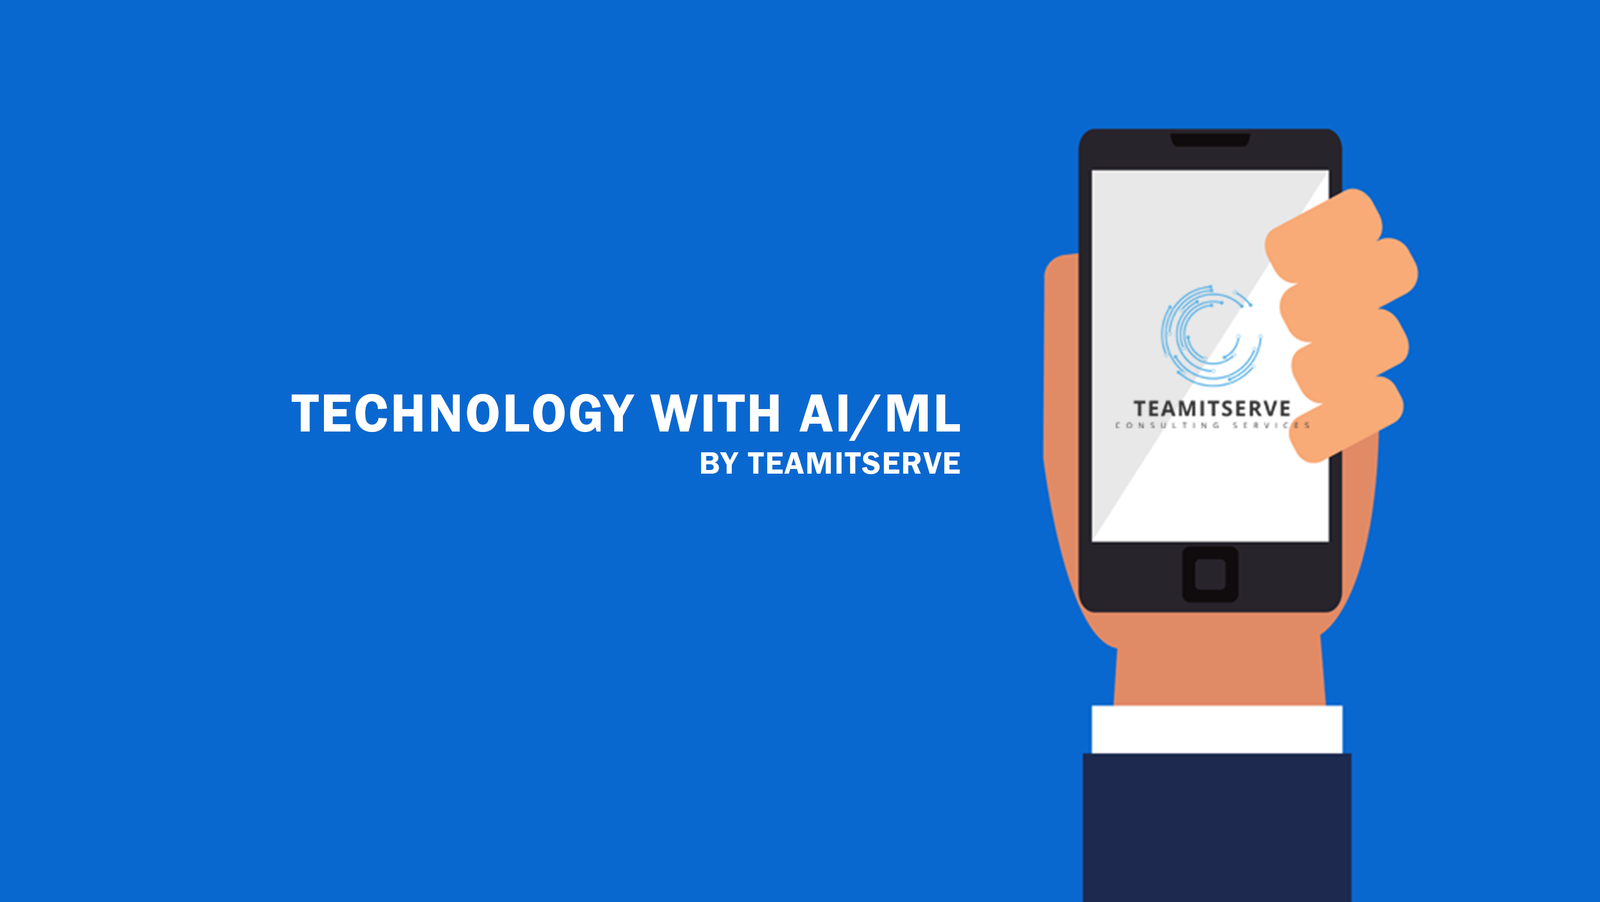 Information Technology with AI/ML